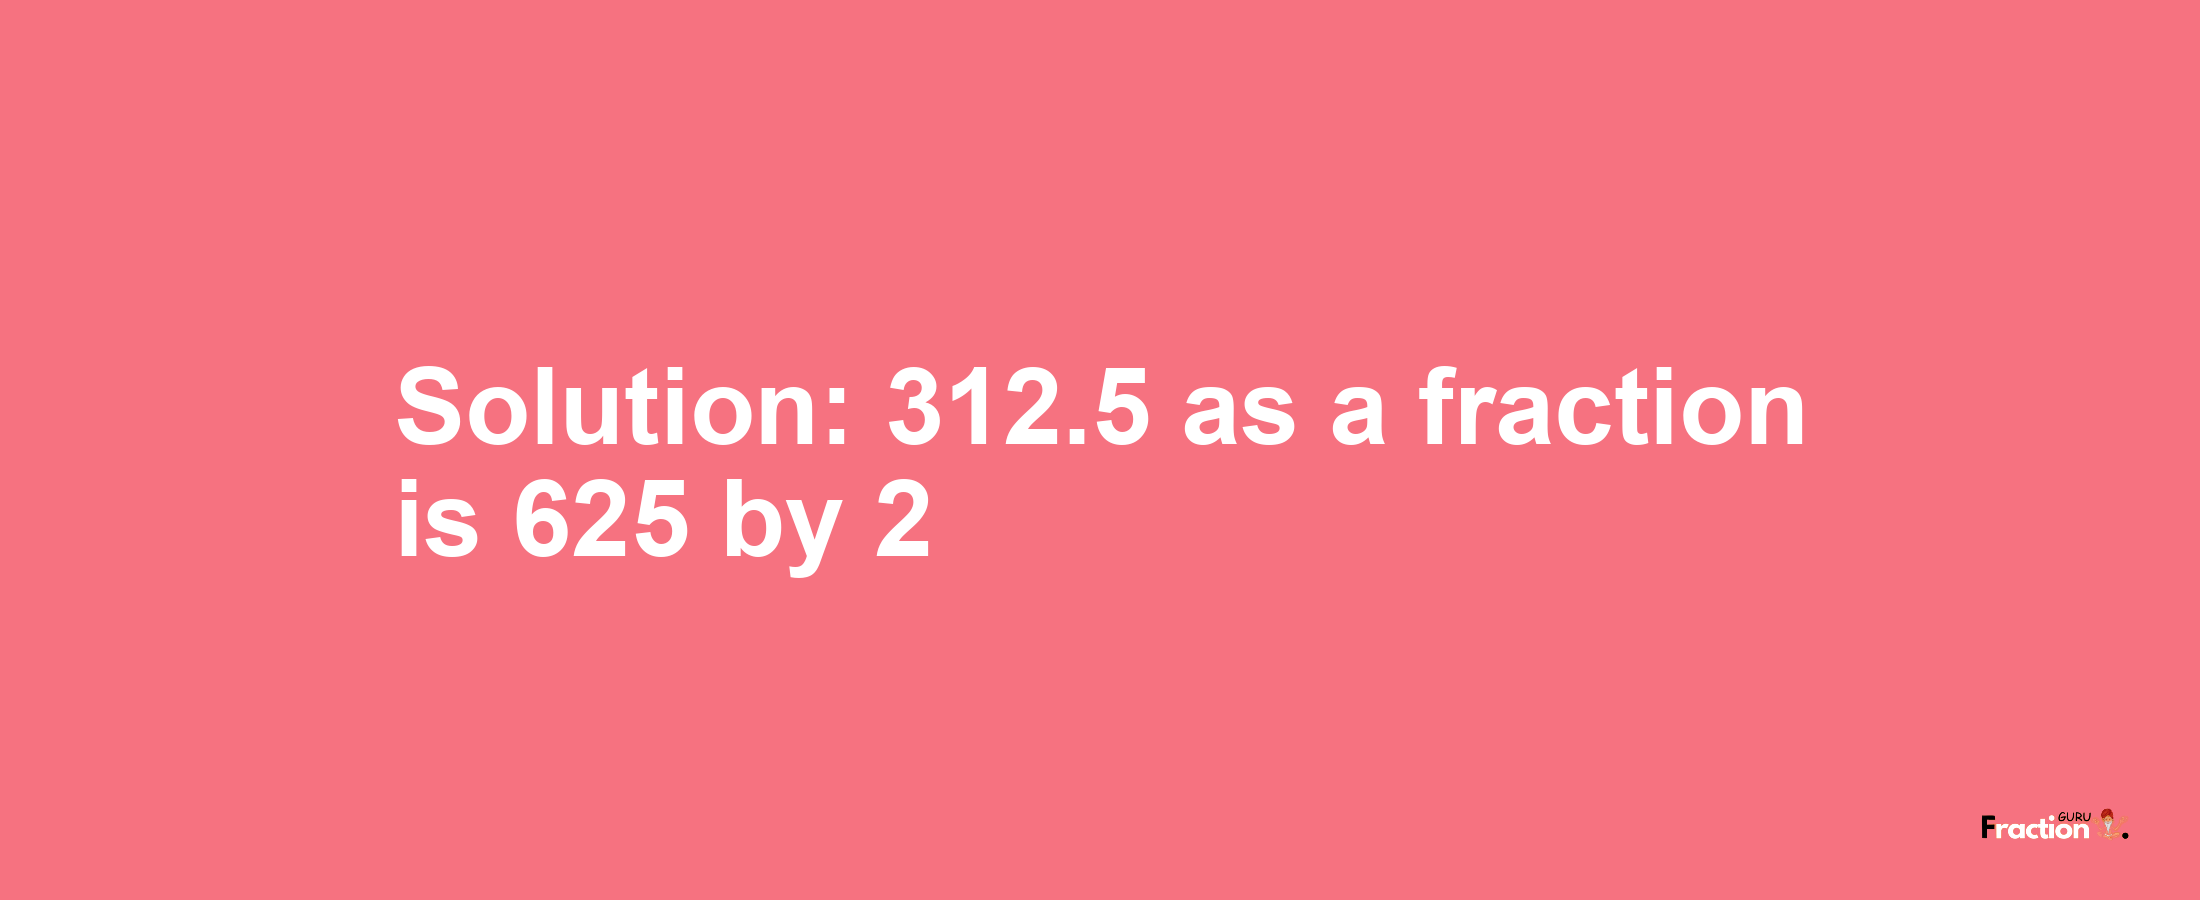 Solution:312.5 as a fraction is 625/2